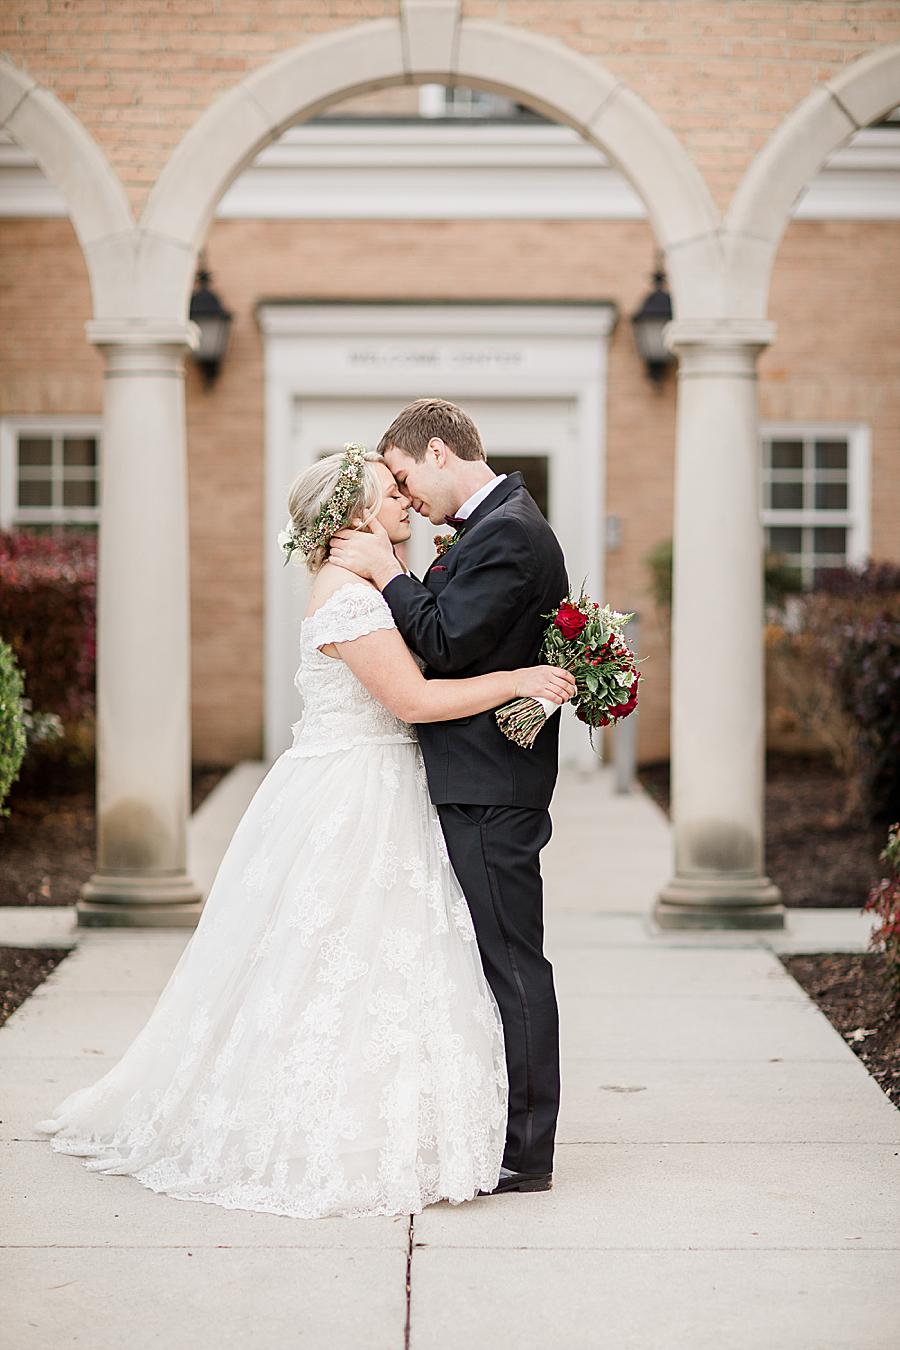 Hands on neck at this The Foundry Wedding by Knoxville Wedding Photographer, Amanda May Photos.